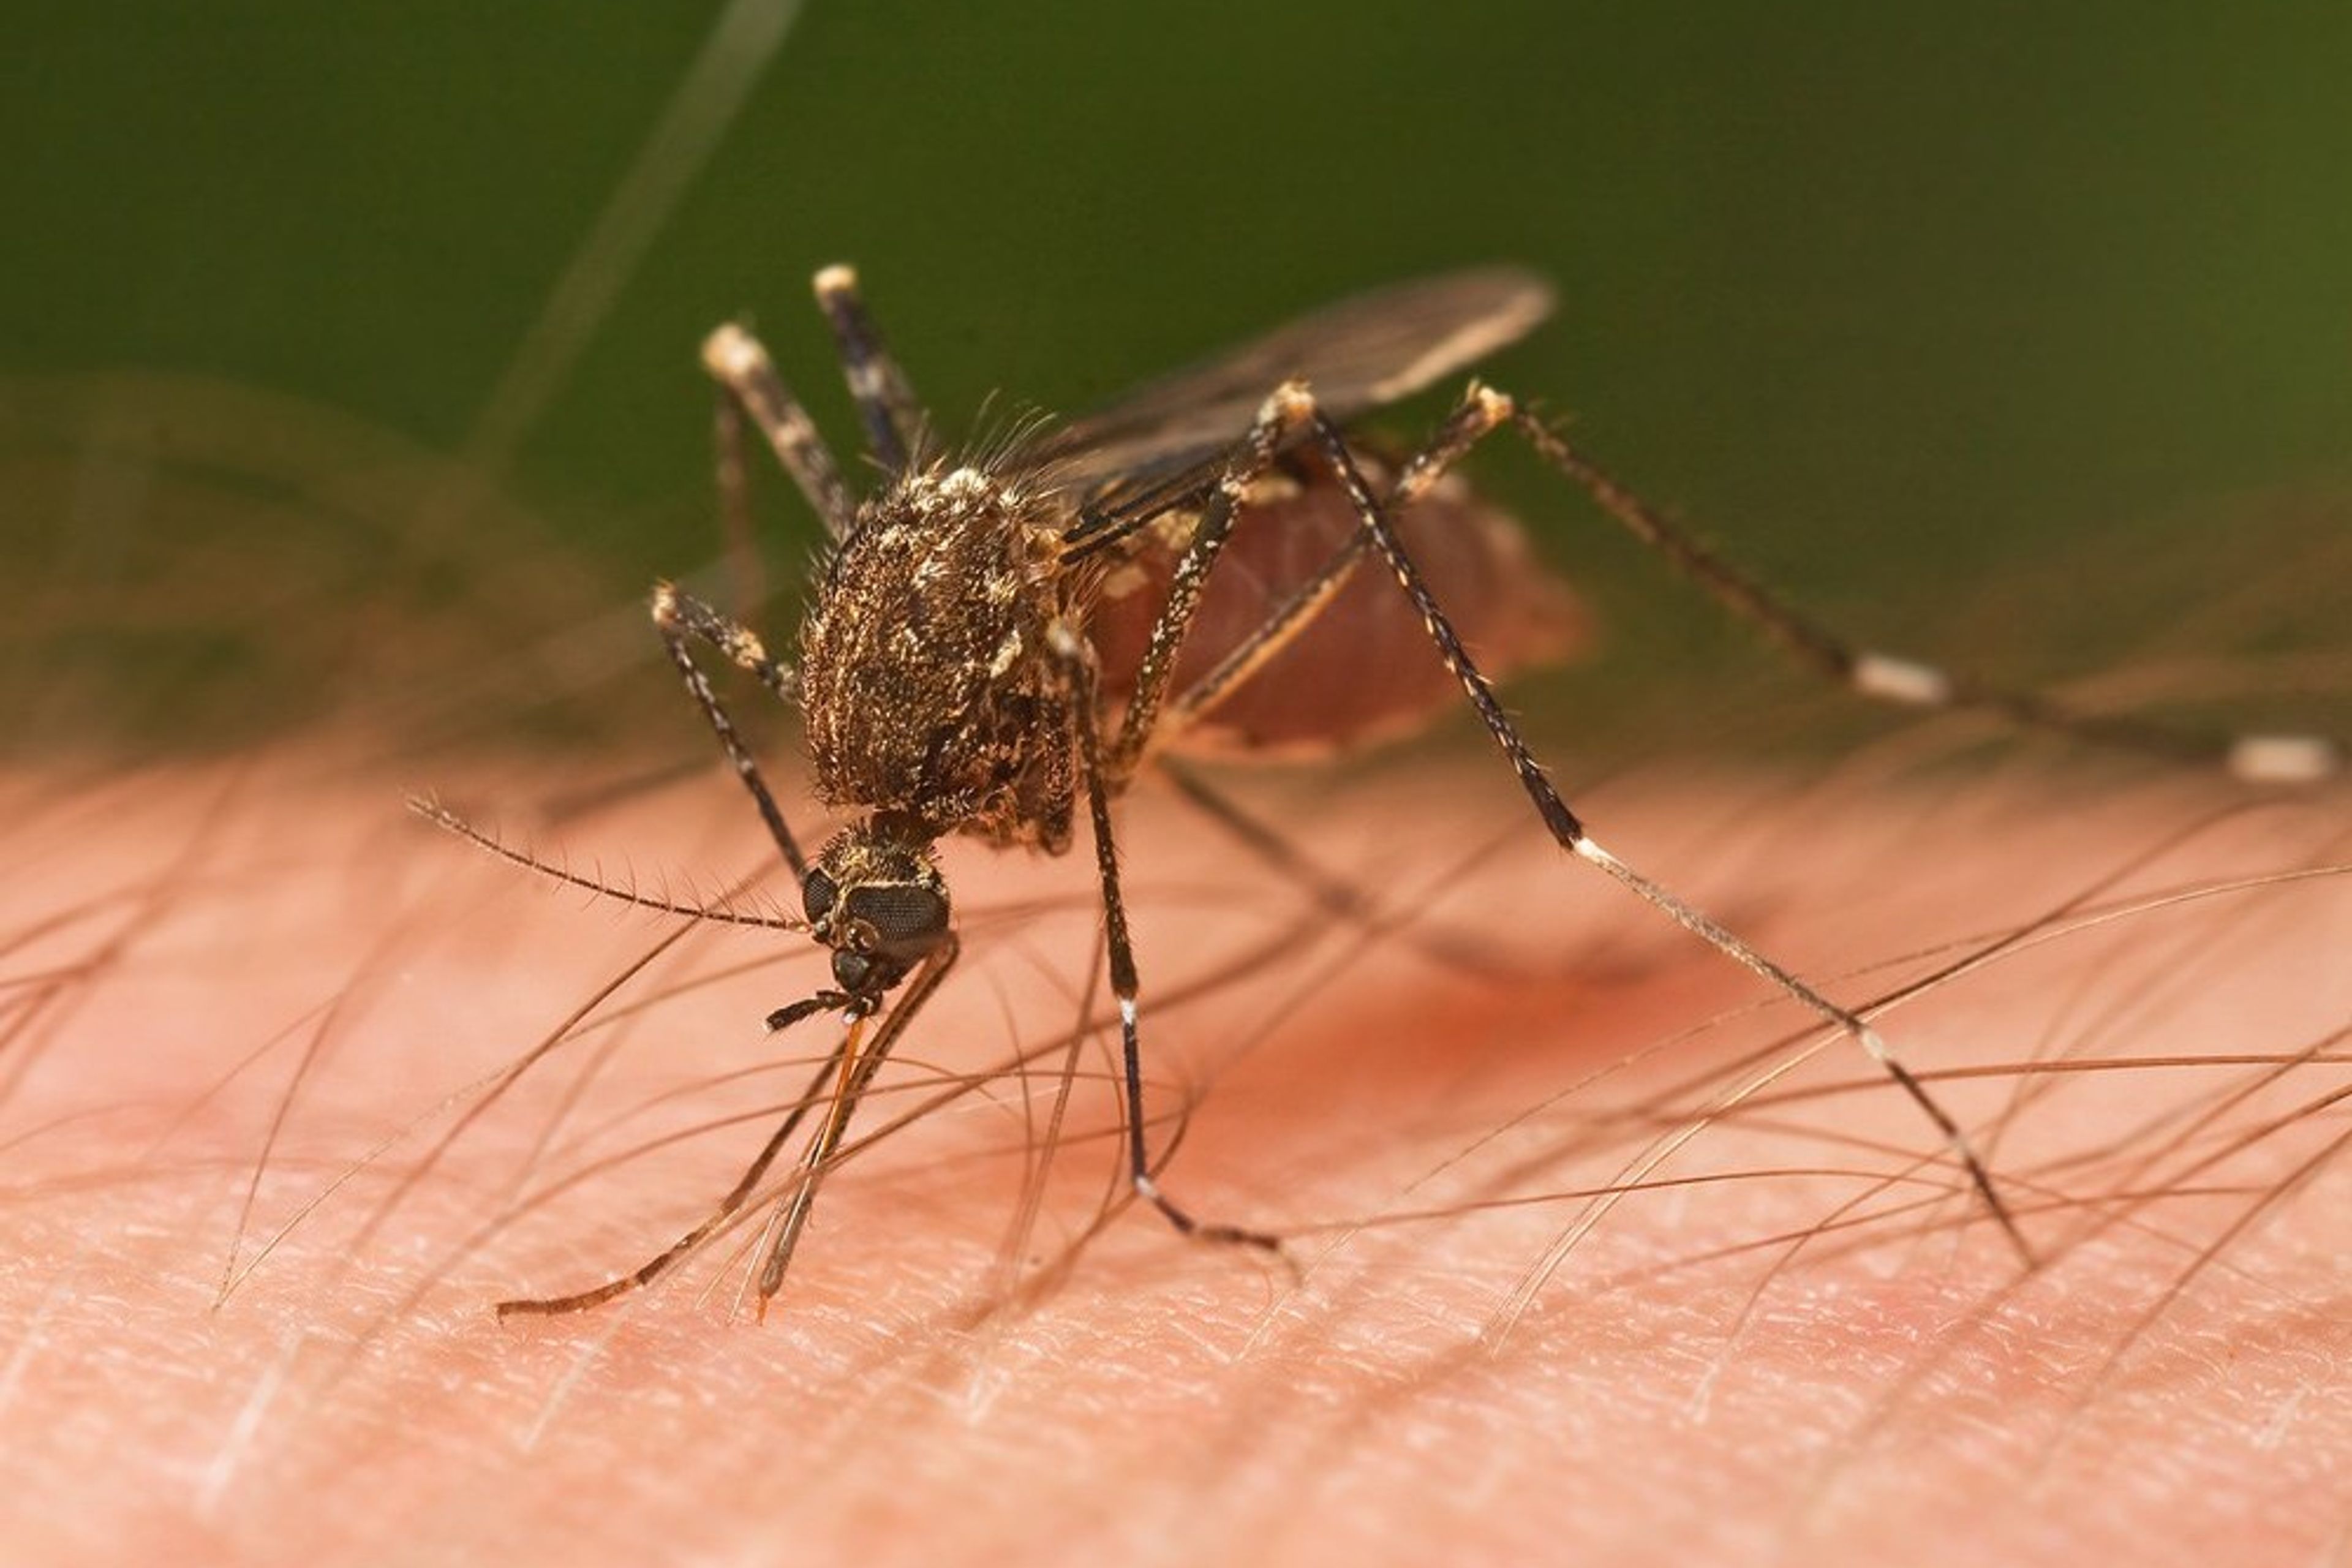 Mosquito on a hairy hand not in Iceland